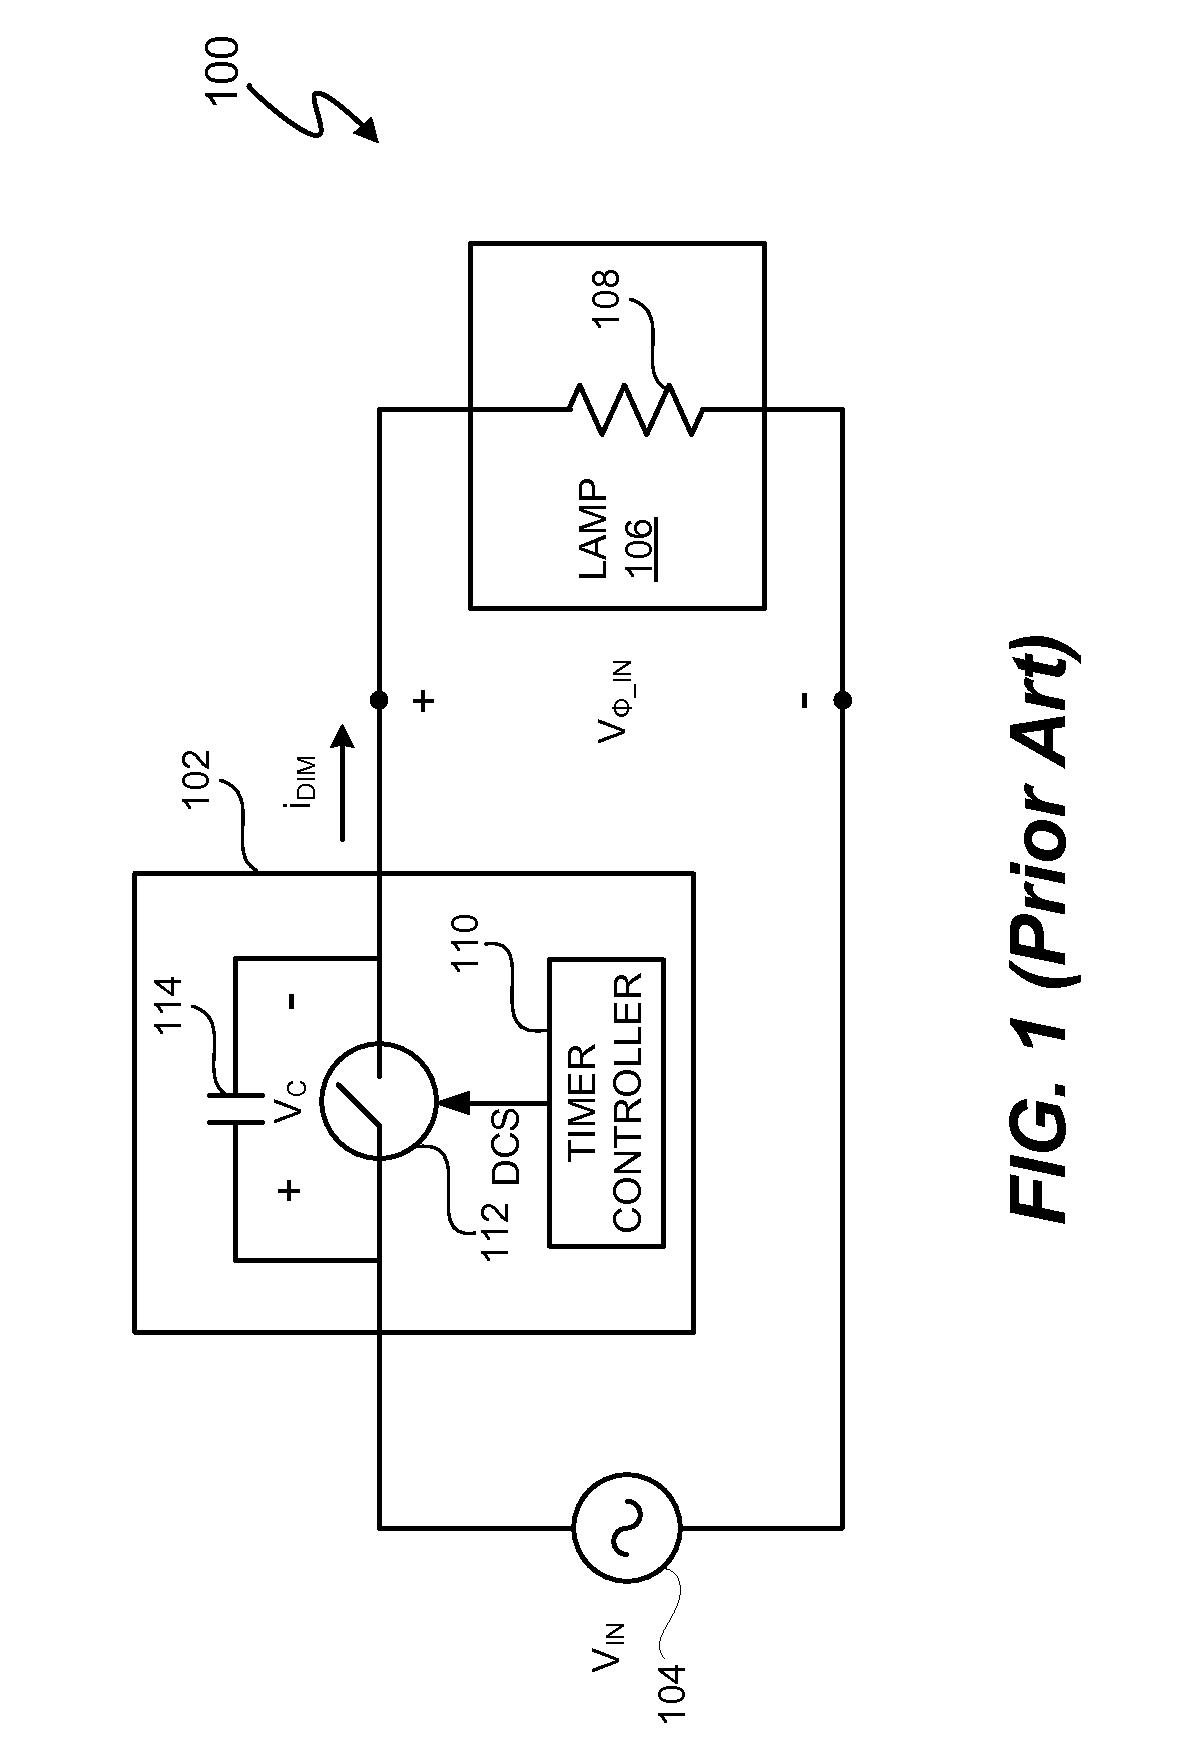 Trailing edge dimmer compatibility with dimmer high resistance prediction